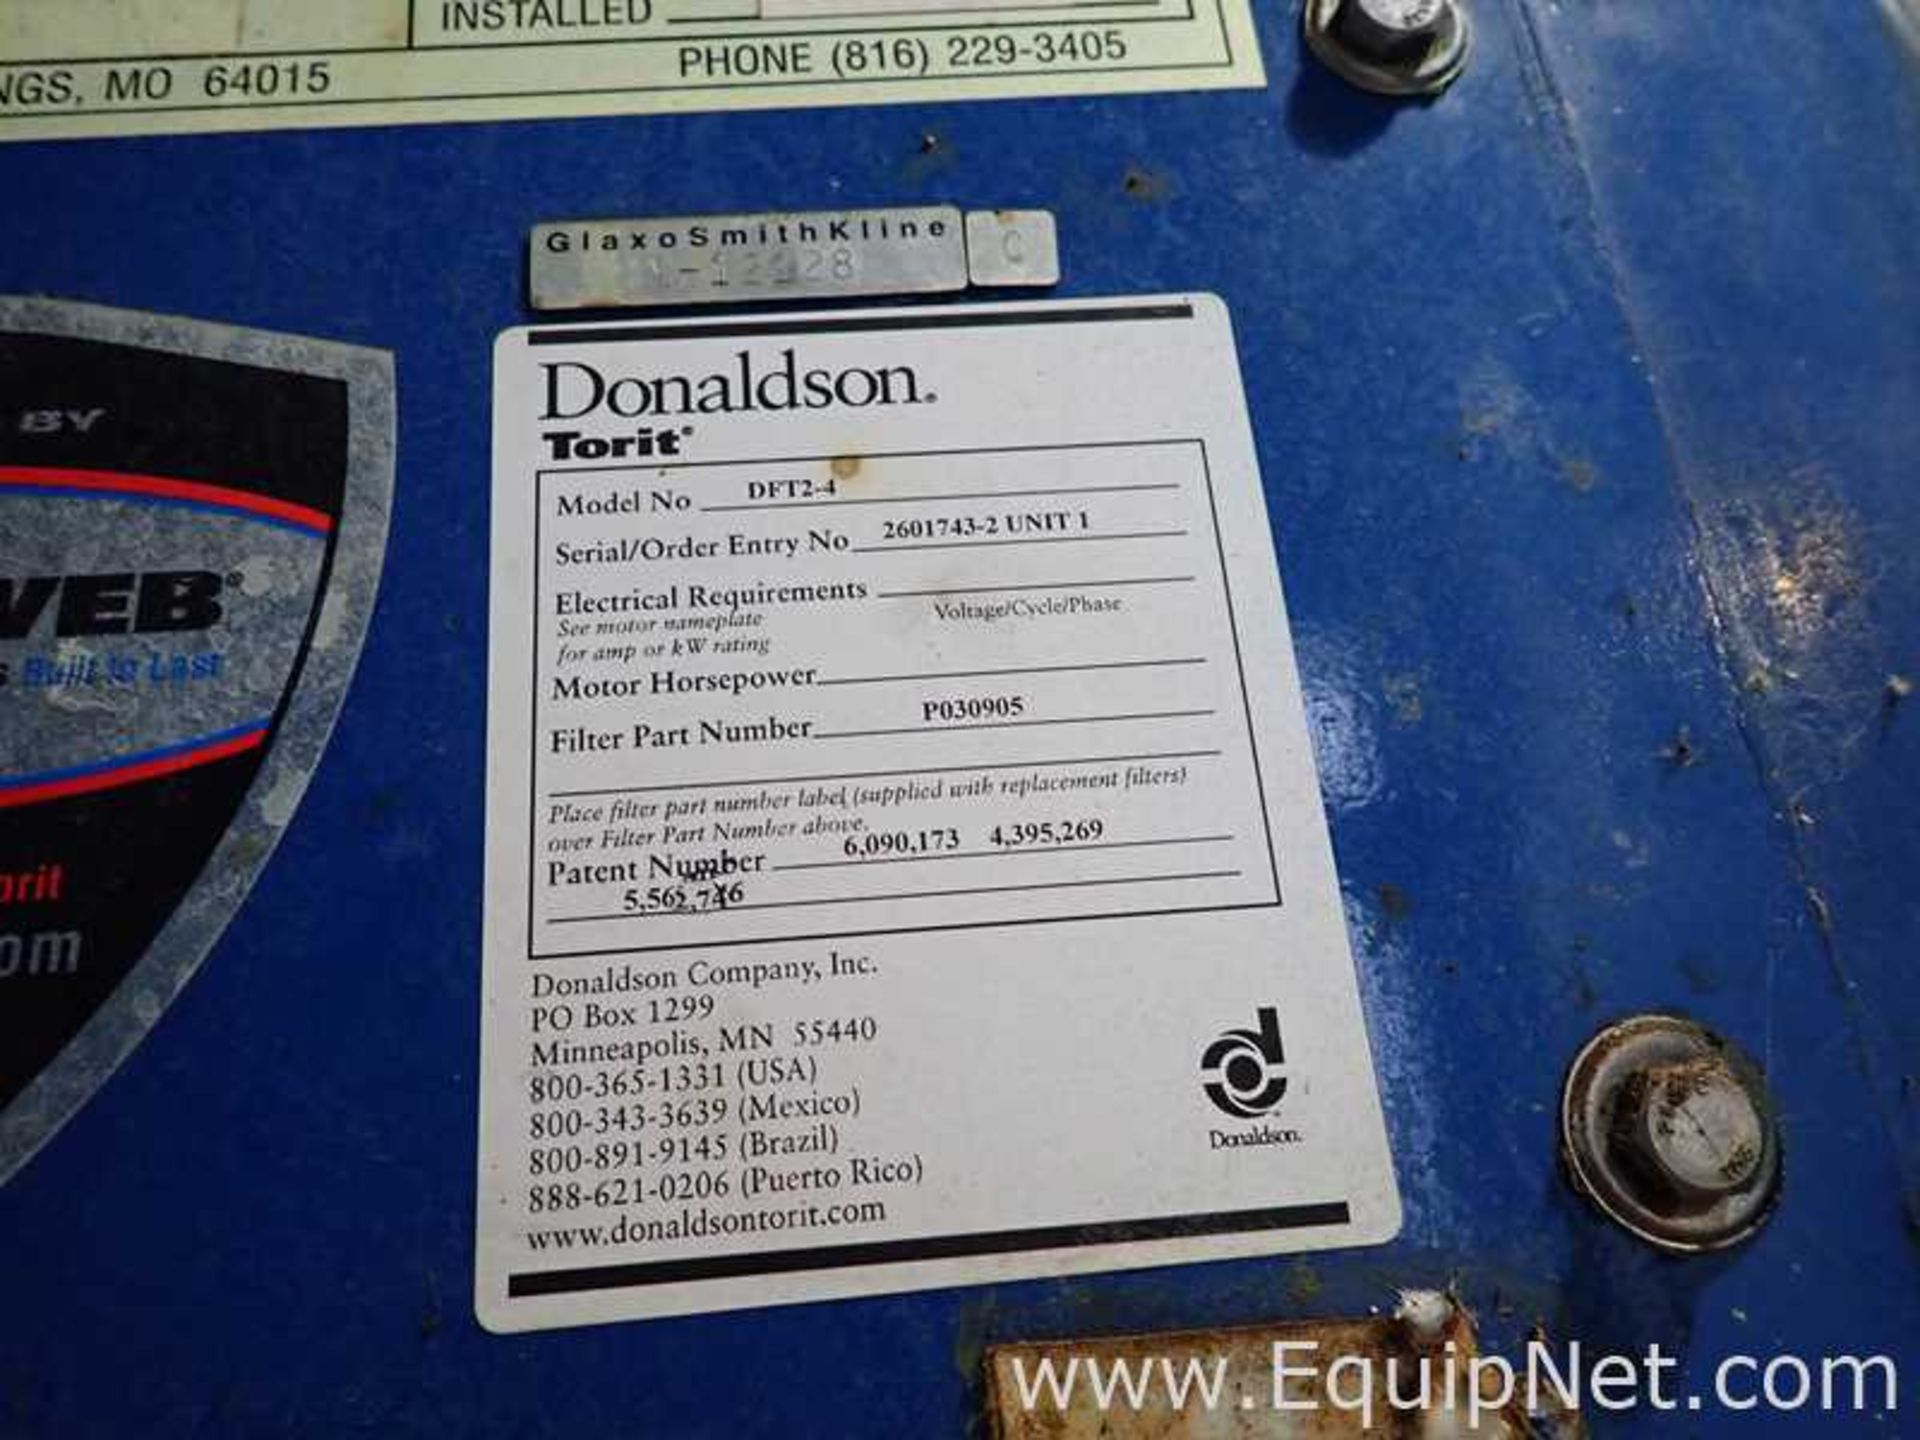 Donaldson Torit DFT 2-4 Dust Collector System - Image 3 of 10